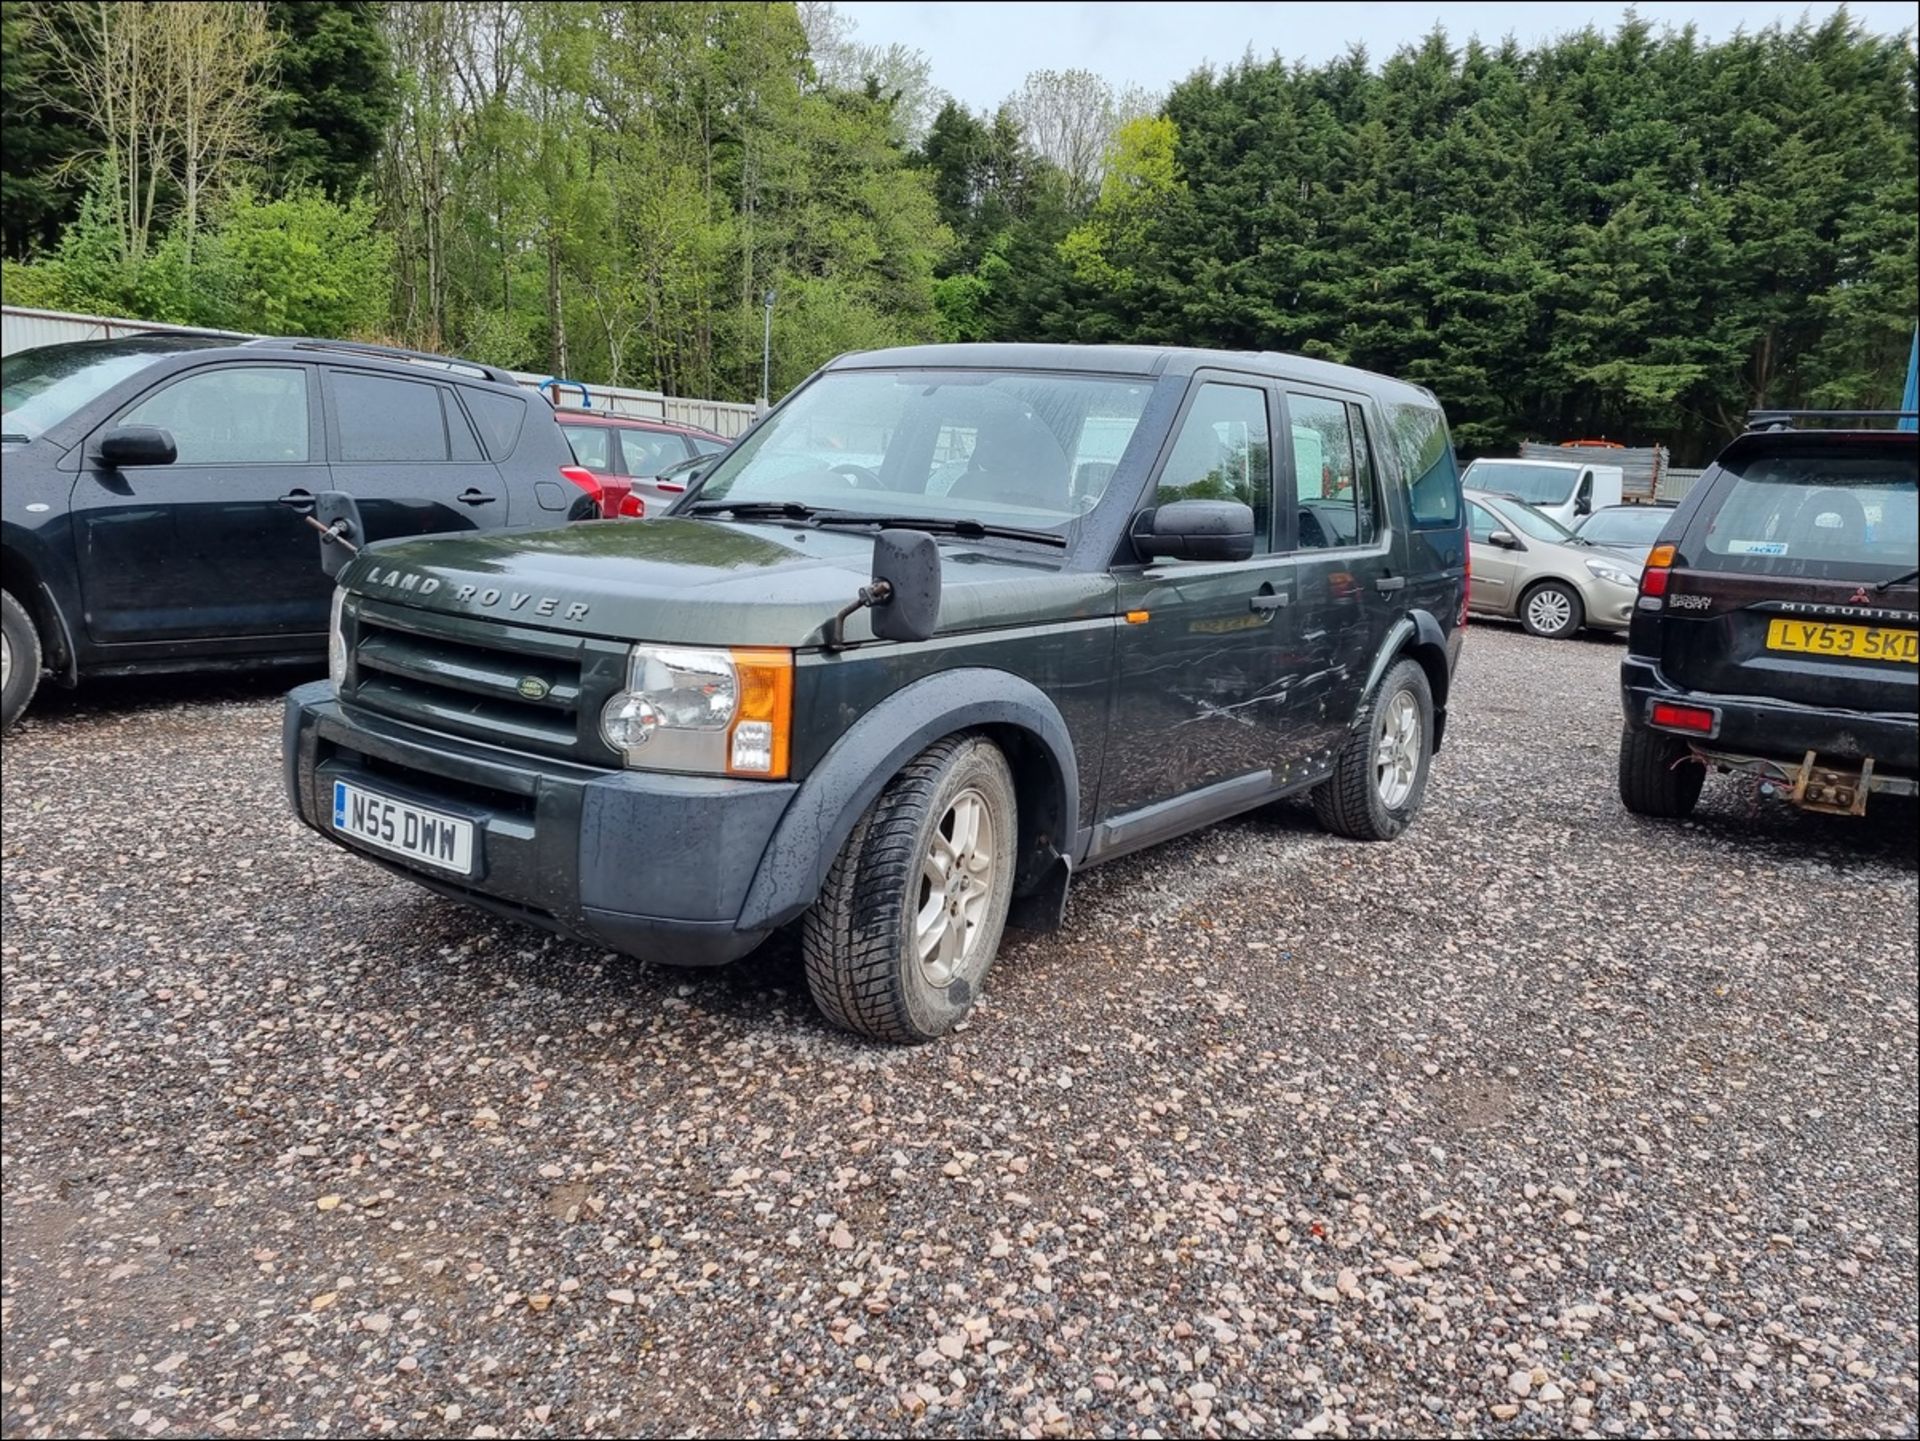 2004 LAND ROVER DISCOVERY 3 TDV6 - 2720cc 5dr Estate (Green) - Image 4 of 13